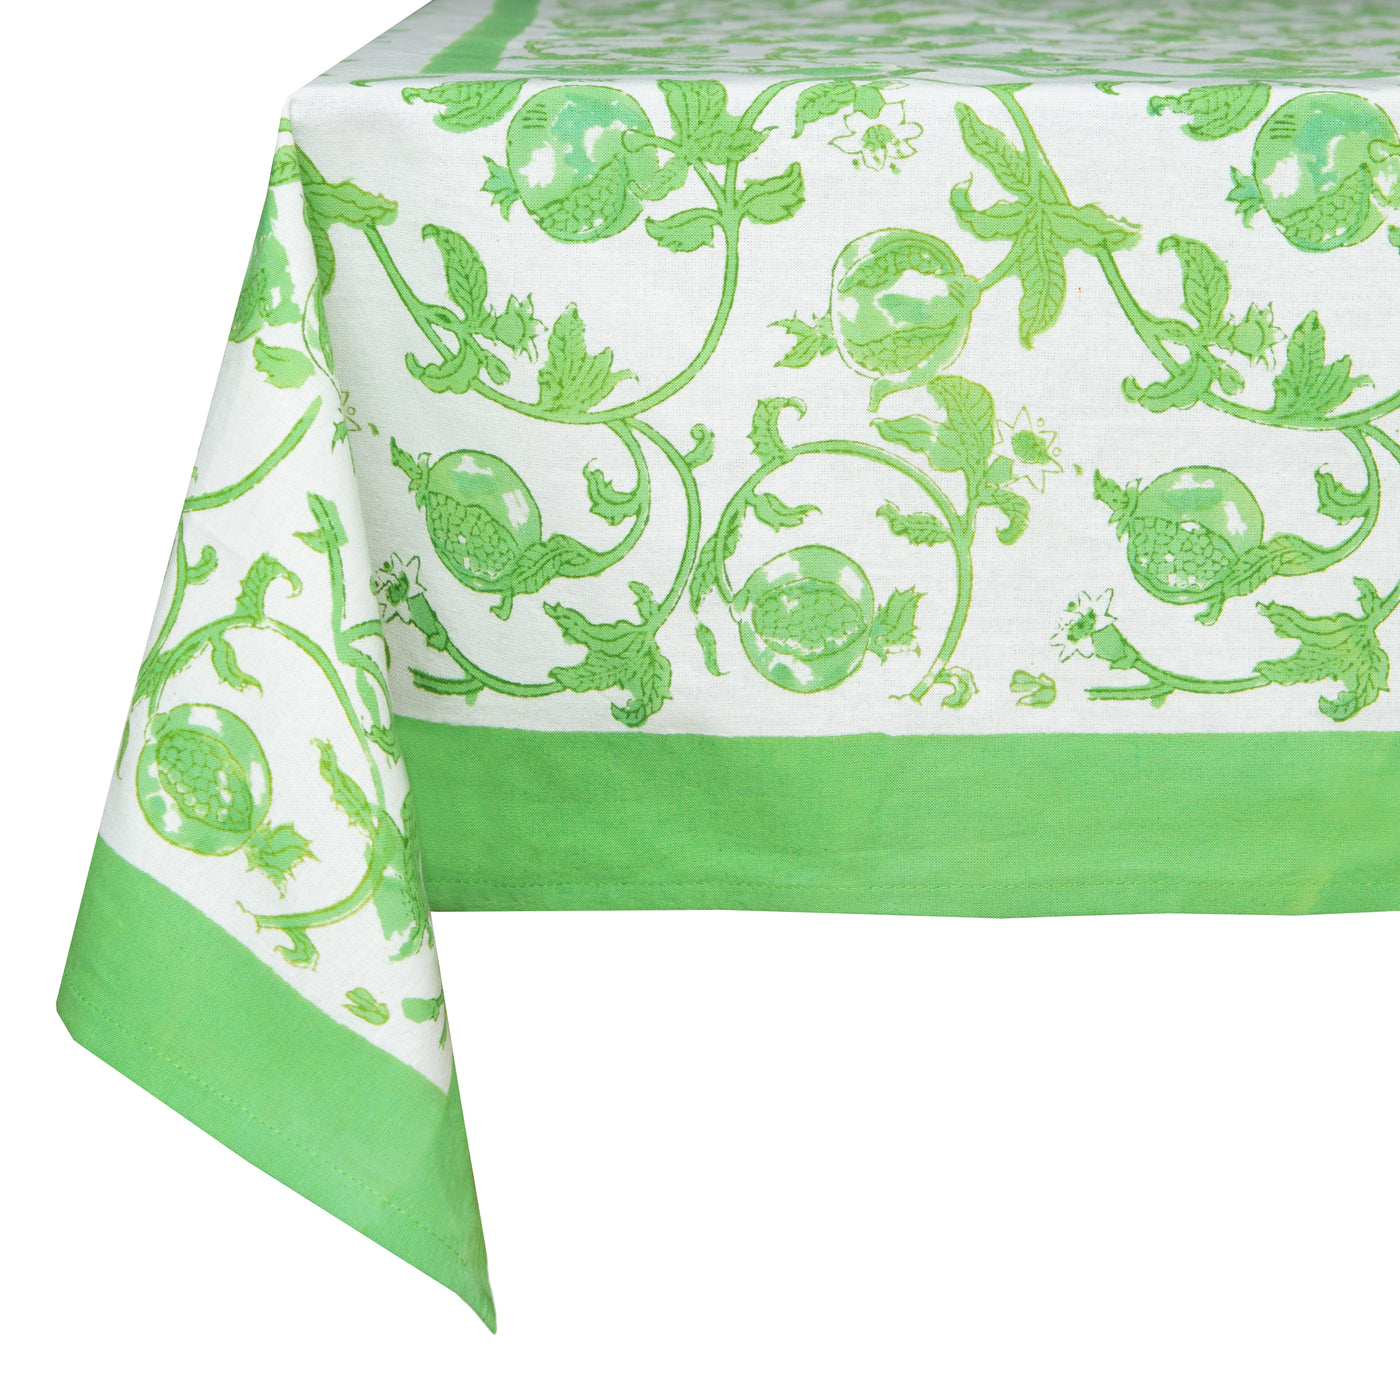 French Tablecloth Granada Parrot Green